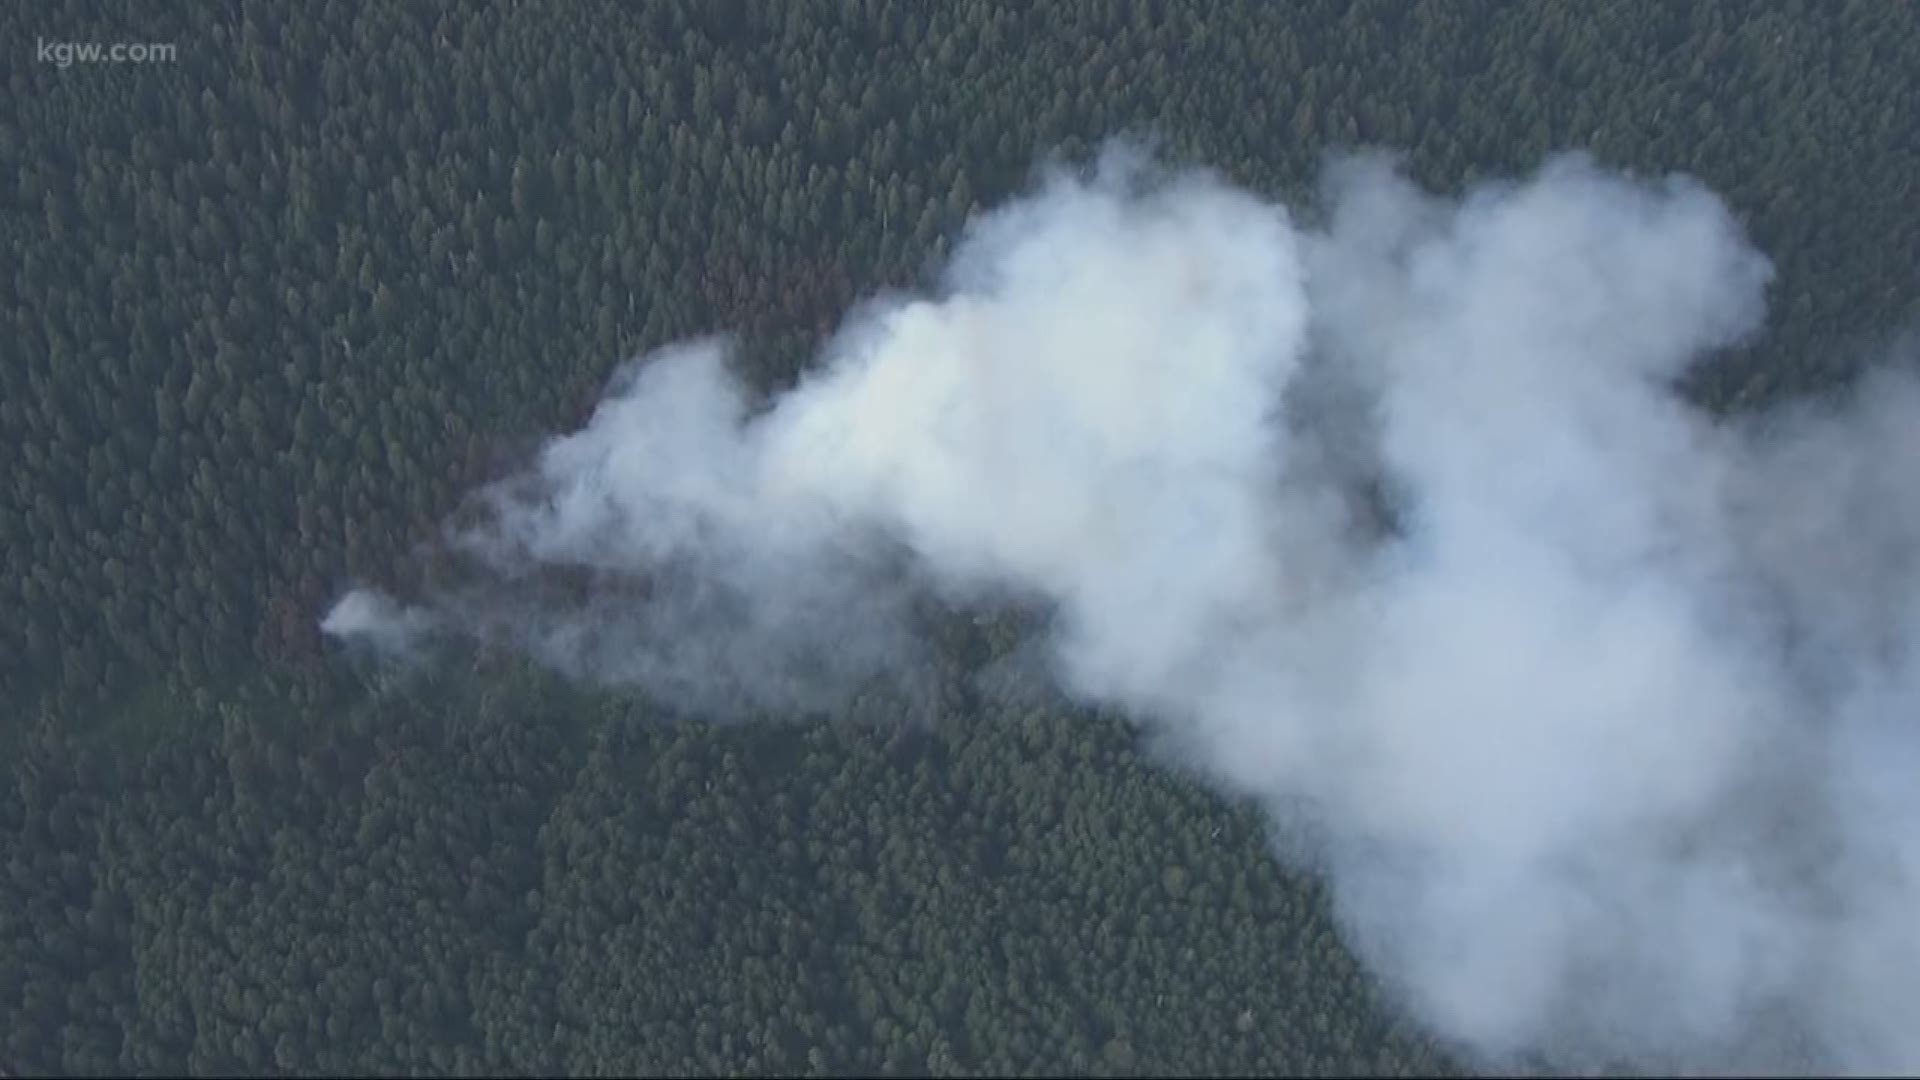 Fire breaks out at Silver Falls State Park